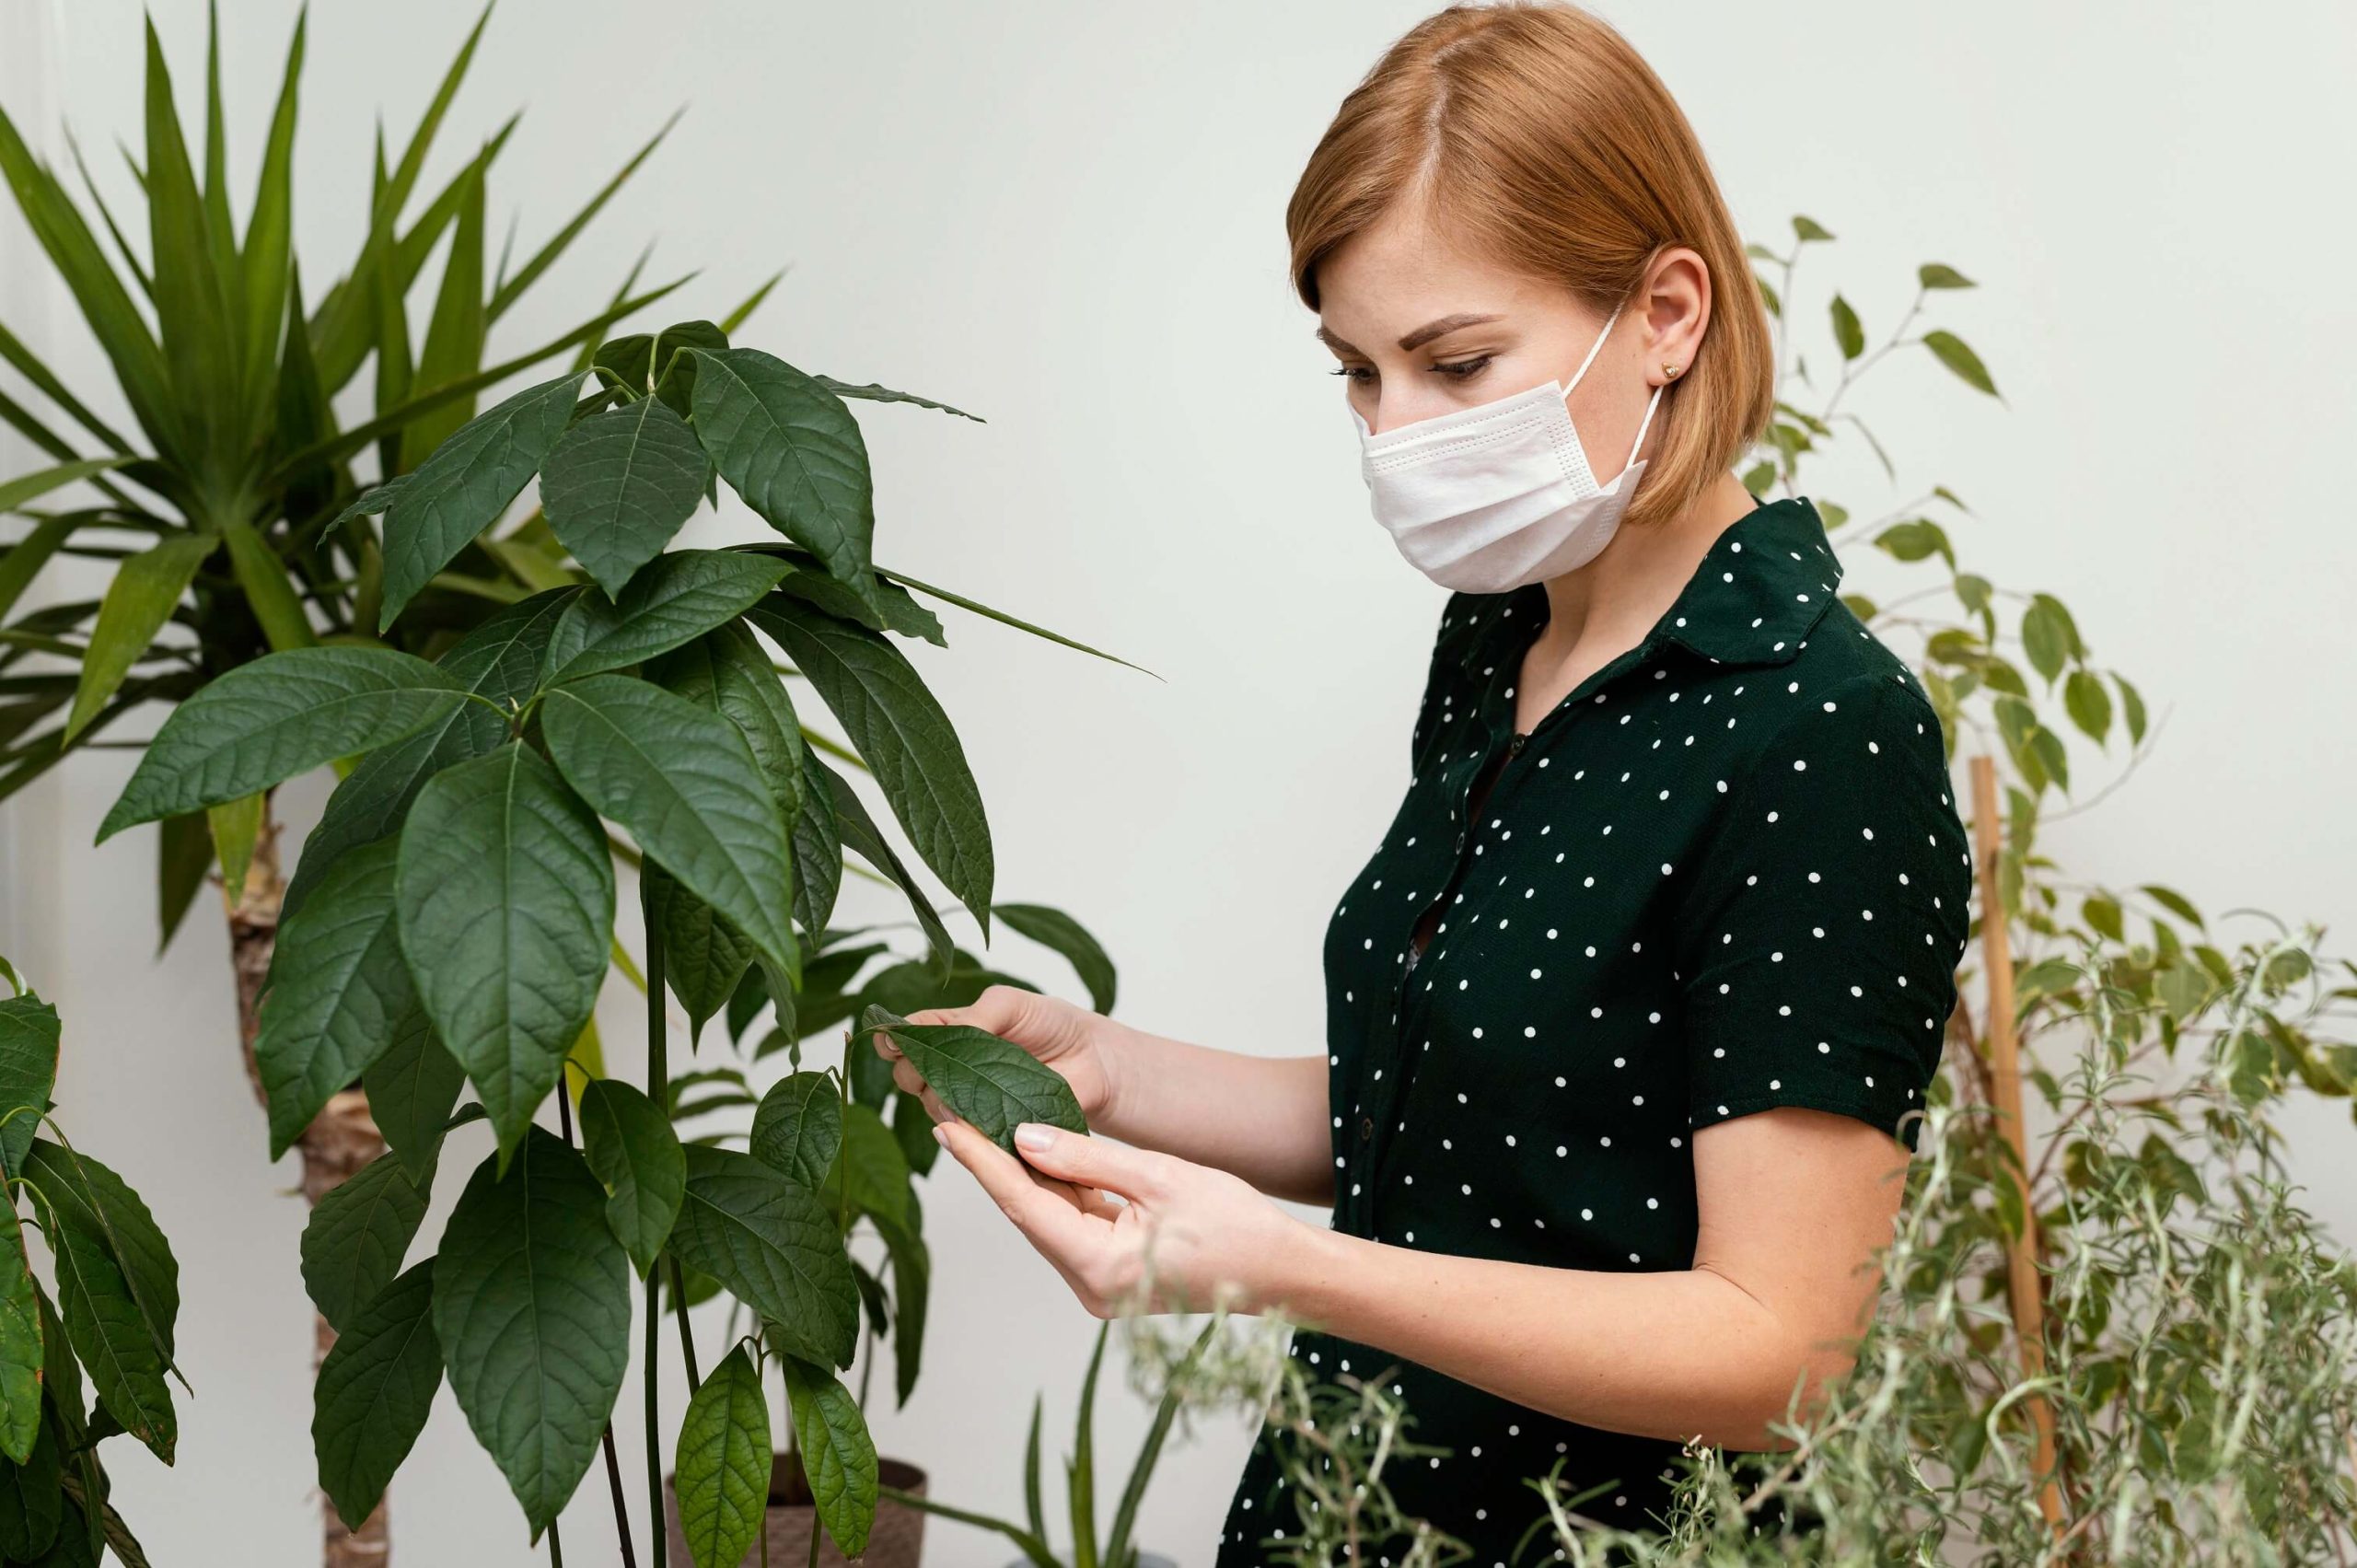 A person cleaning a plant